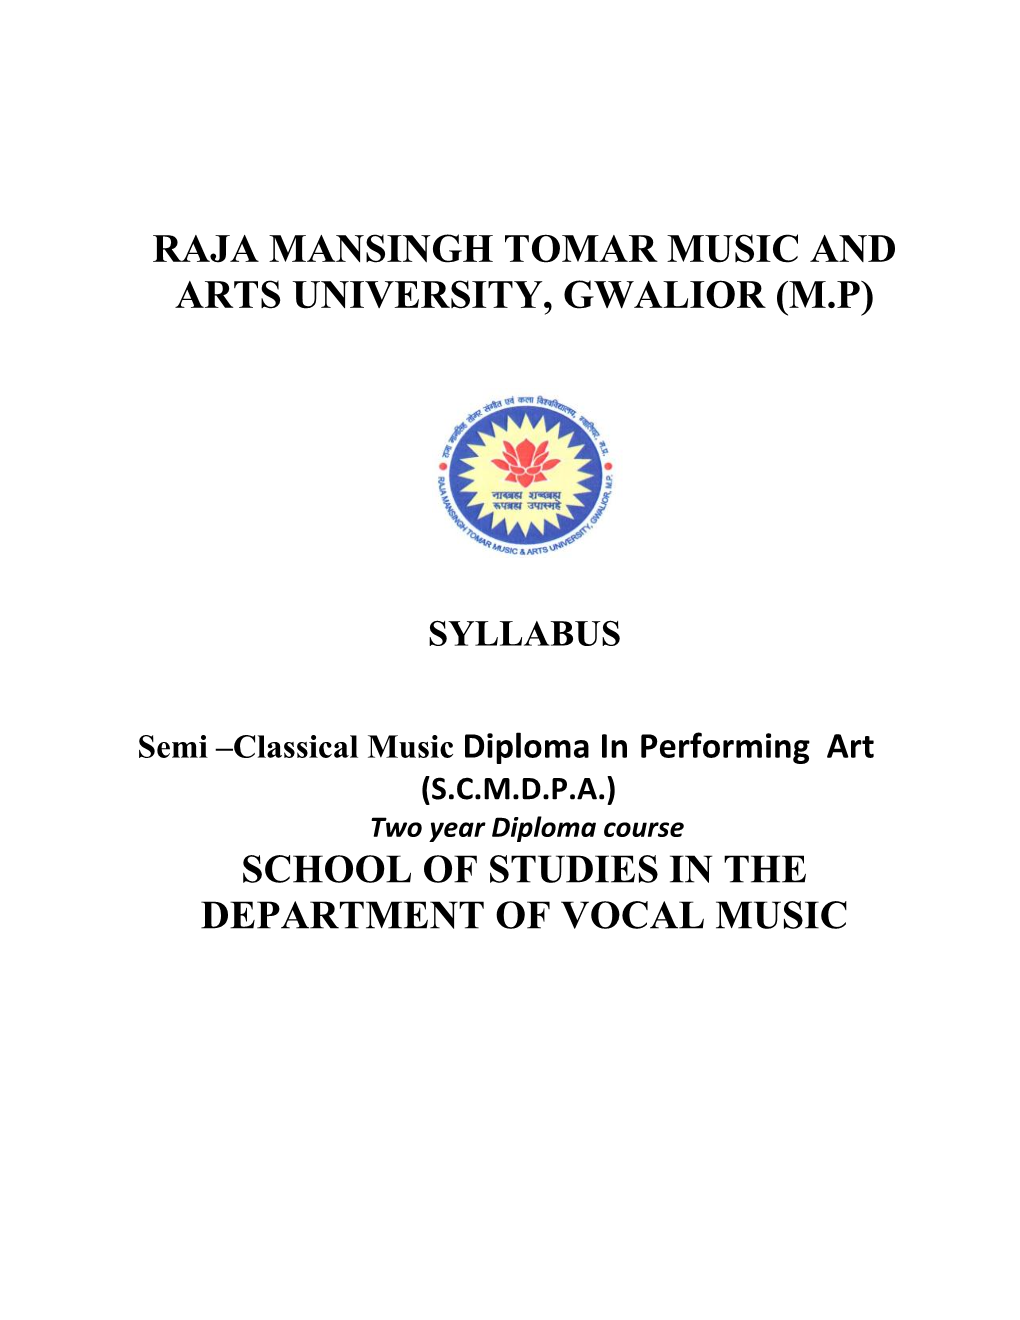 Semi –Classical Music Diploma in Performing Art (S.C.M.D.P.A.) Two Year Diploma Course SCHOOL of STUDIES in the DEPARTMENT of VOCAL MUSIC